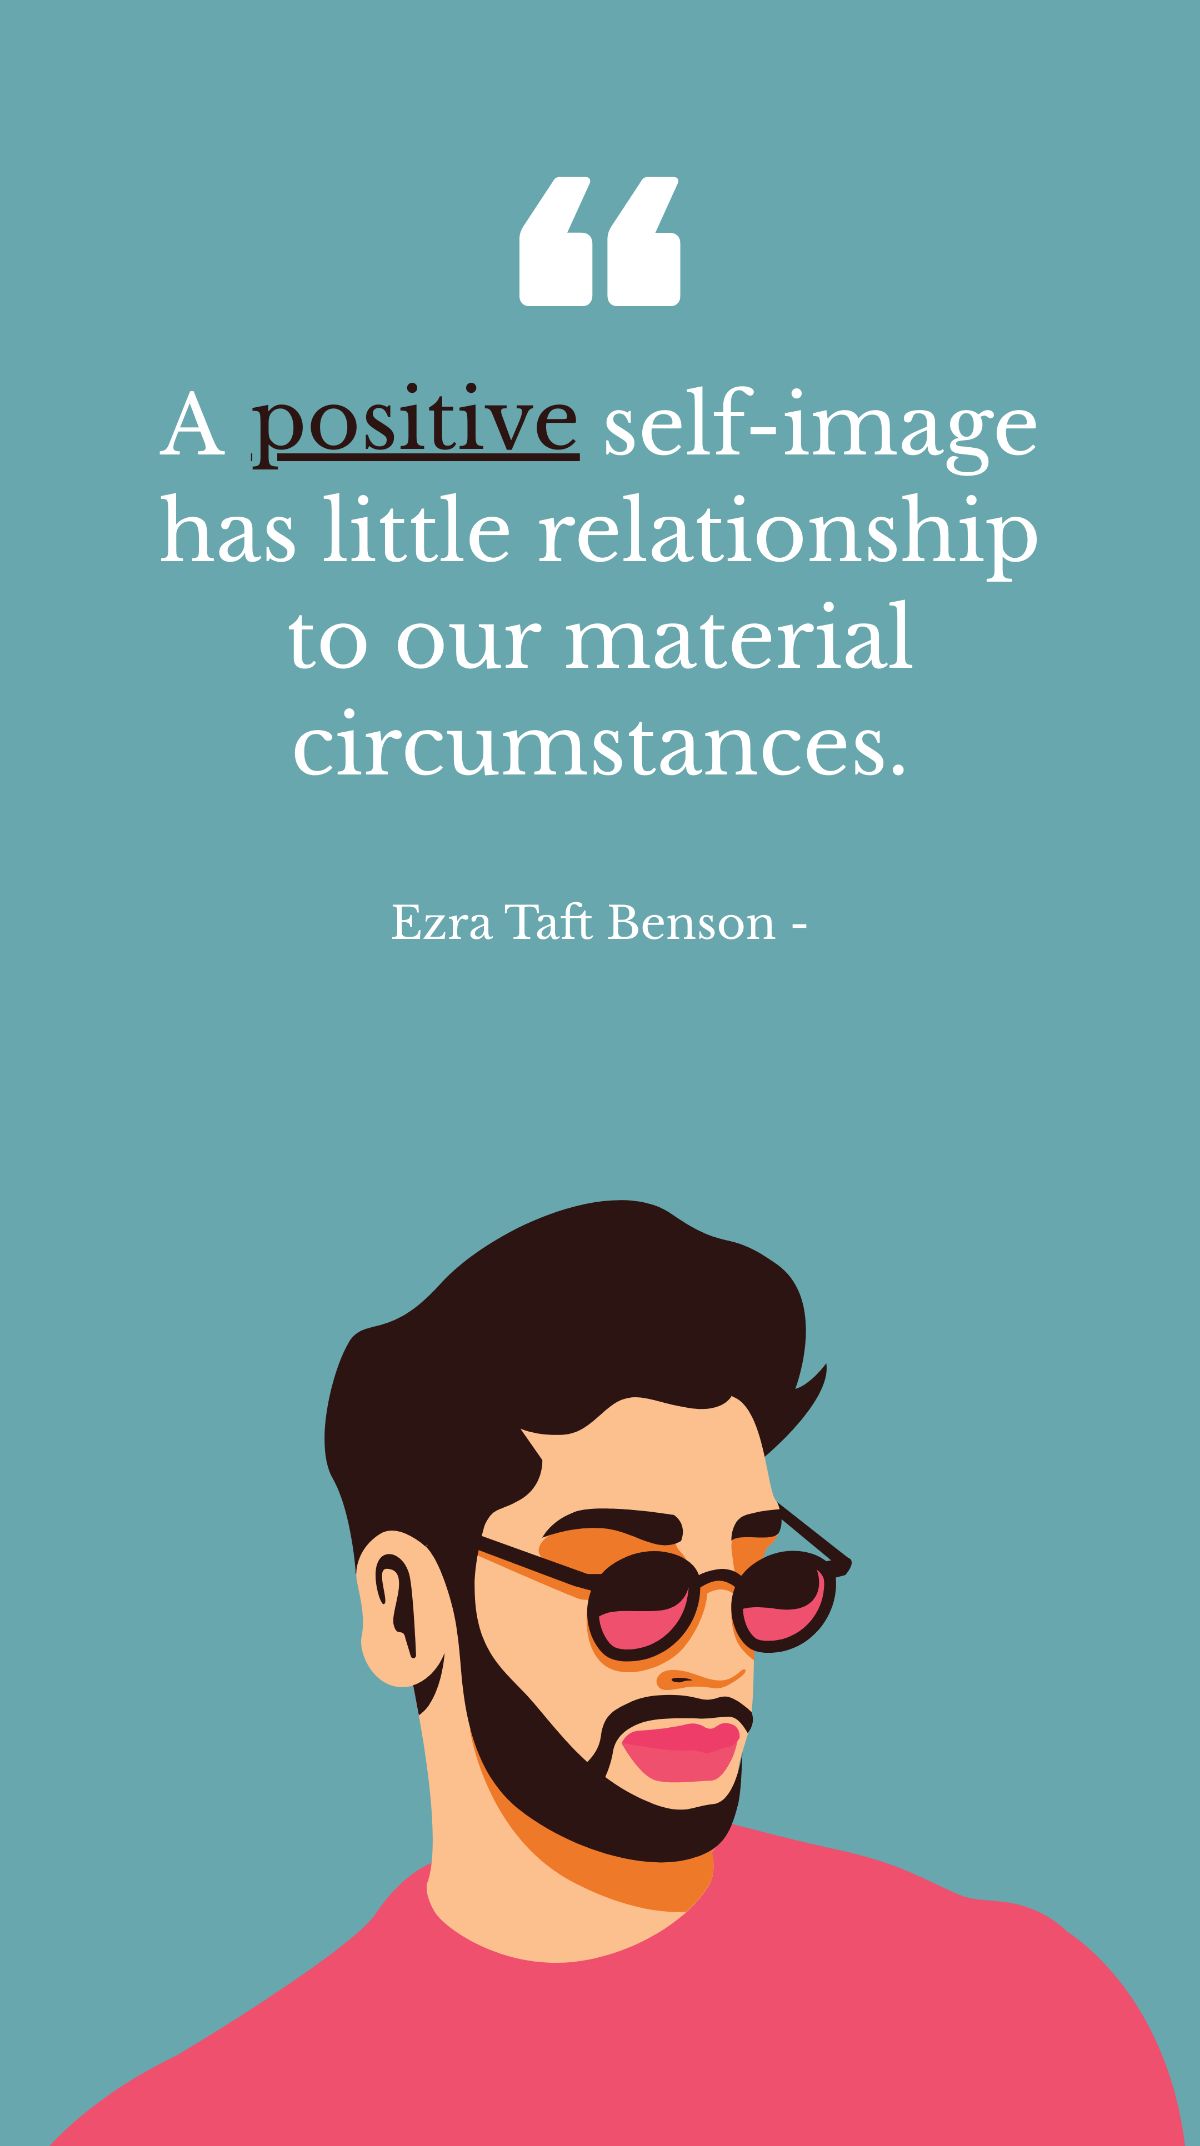 Ezra Taft Benson - A positive self-image has little relationship to our material circumstances. Template